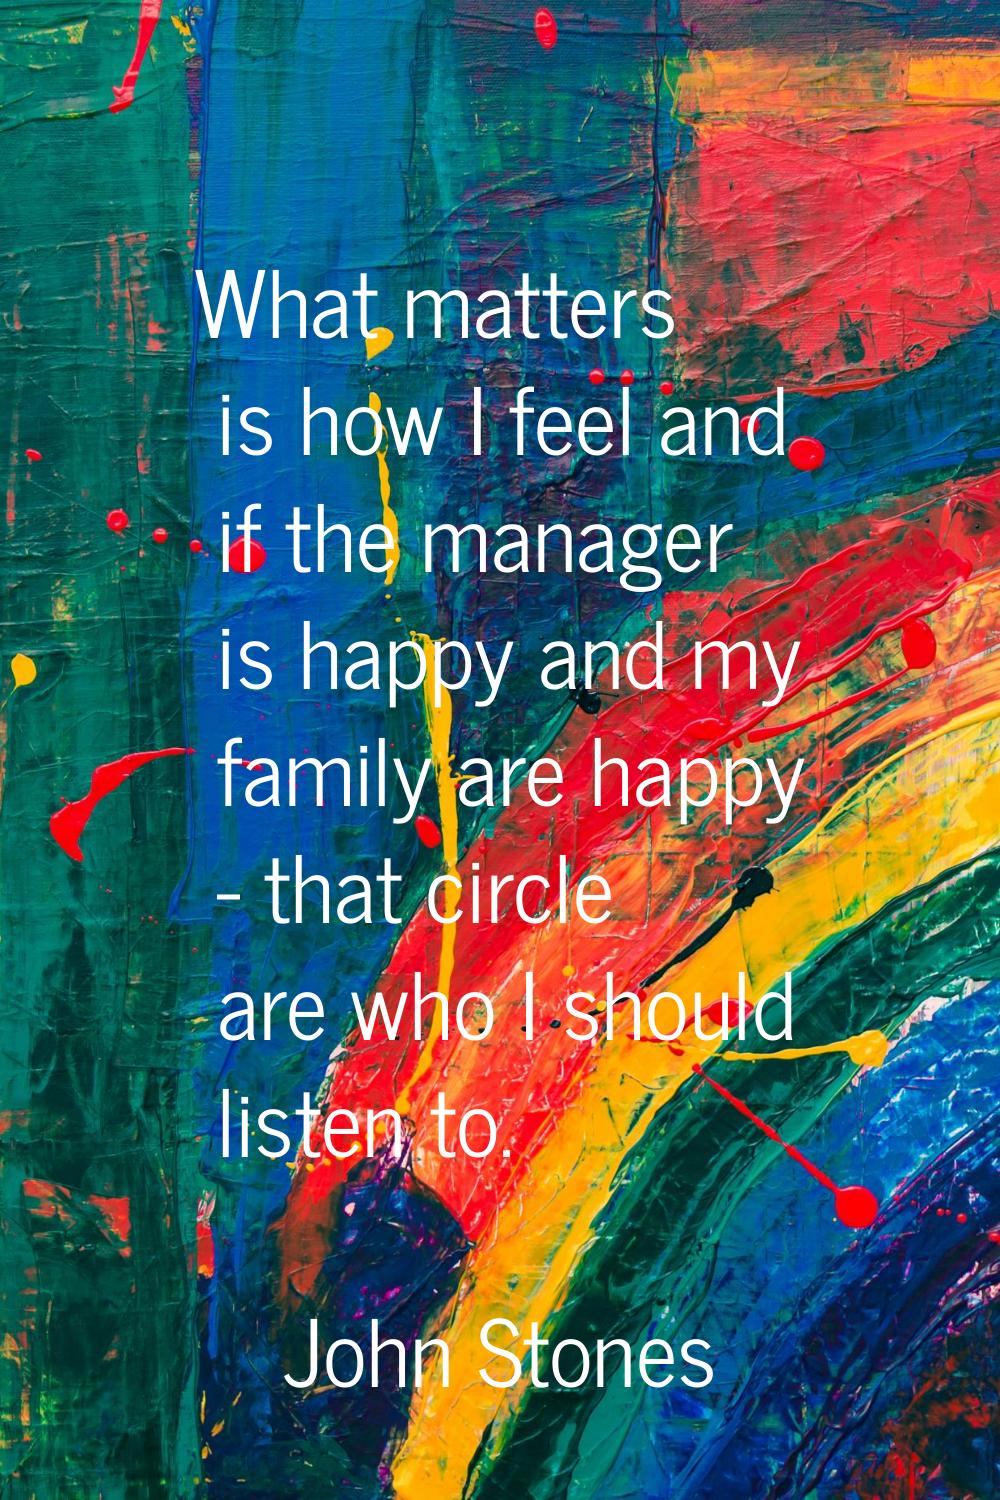 What matters is how I feel and if the manager is happy and my family are happy - that circle are wh